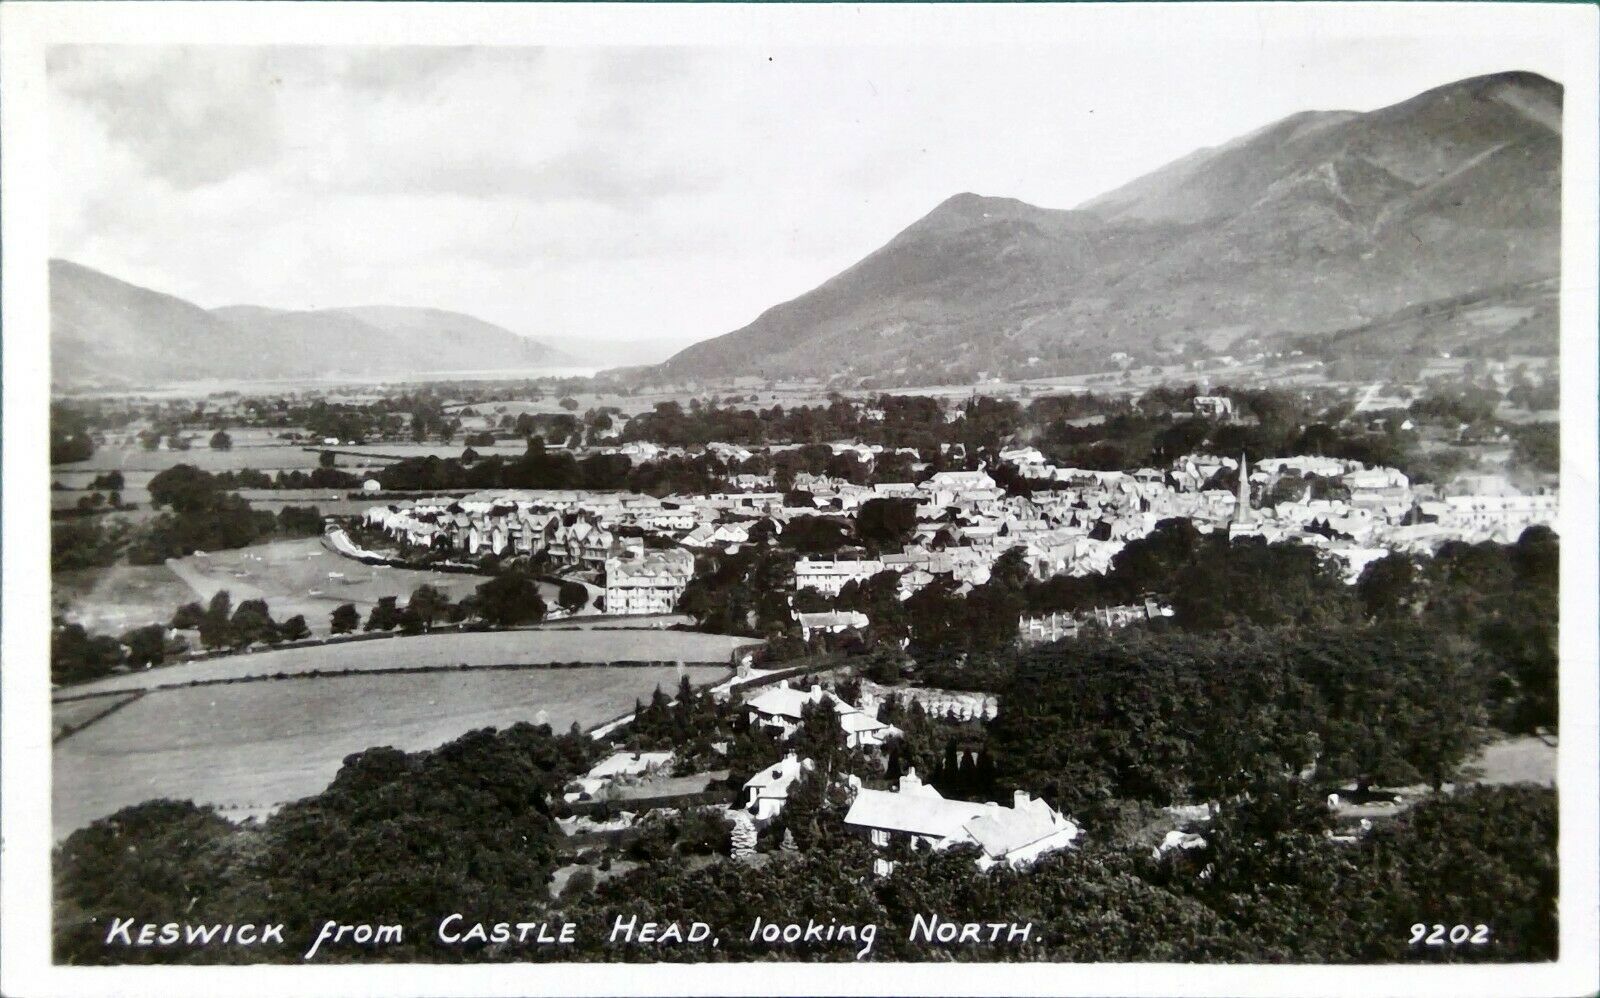 House Clearance - Keswick from Castle Head looking North B&W service